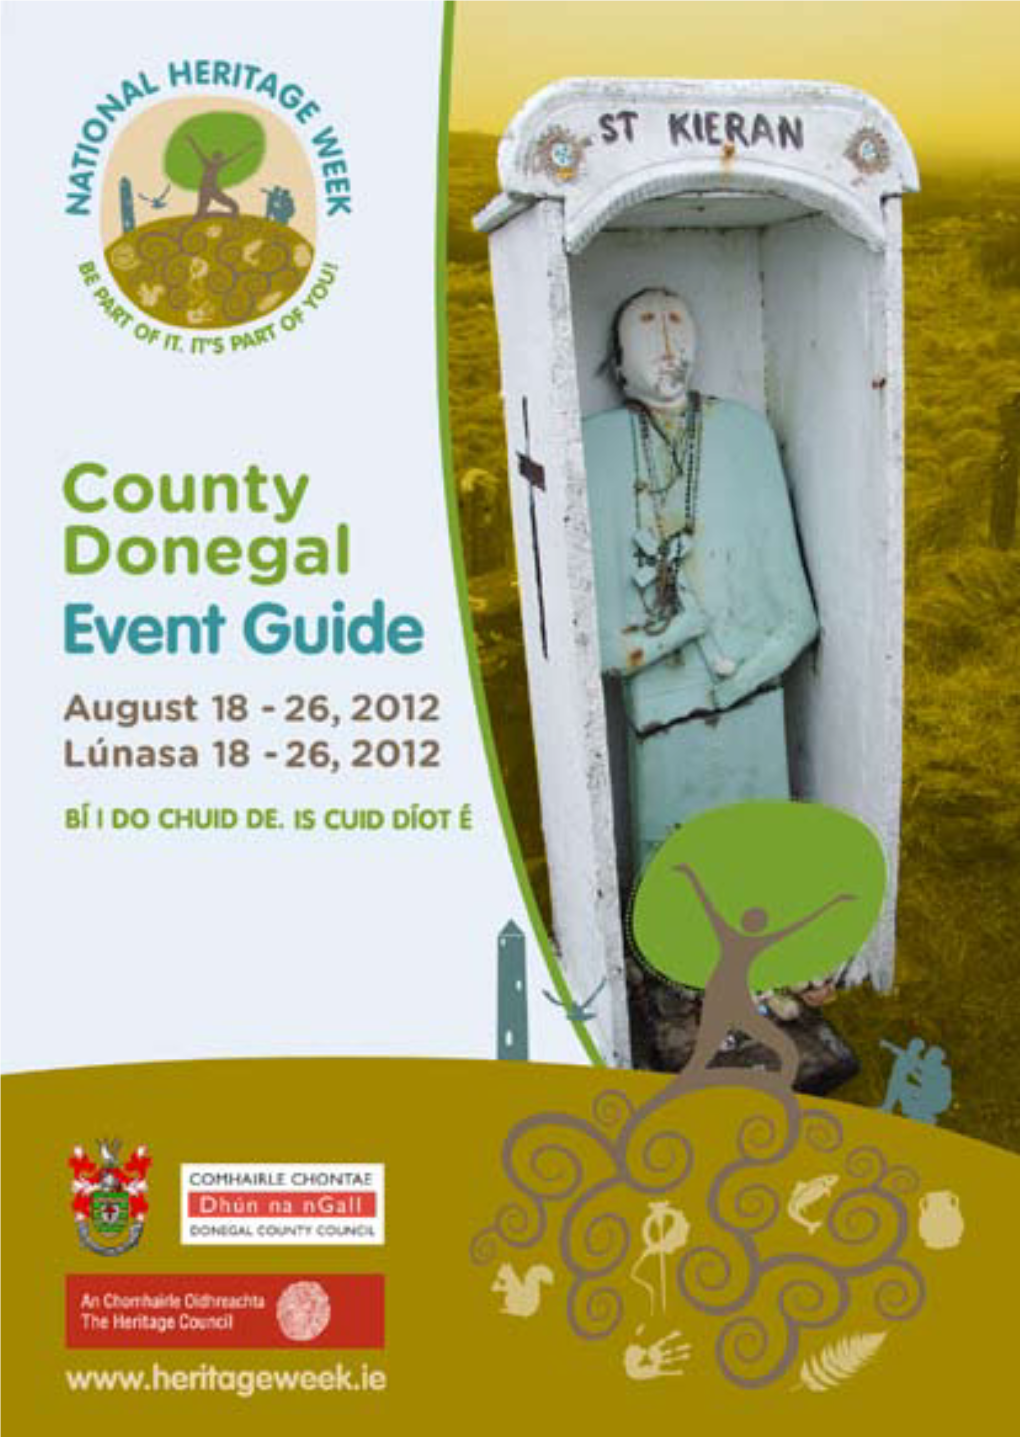 County Donegal 'Heritage Week' Event Guide 2012 (Booklet)